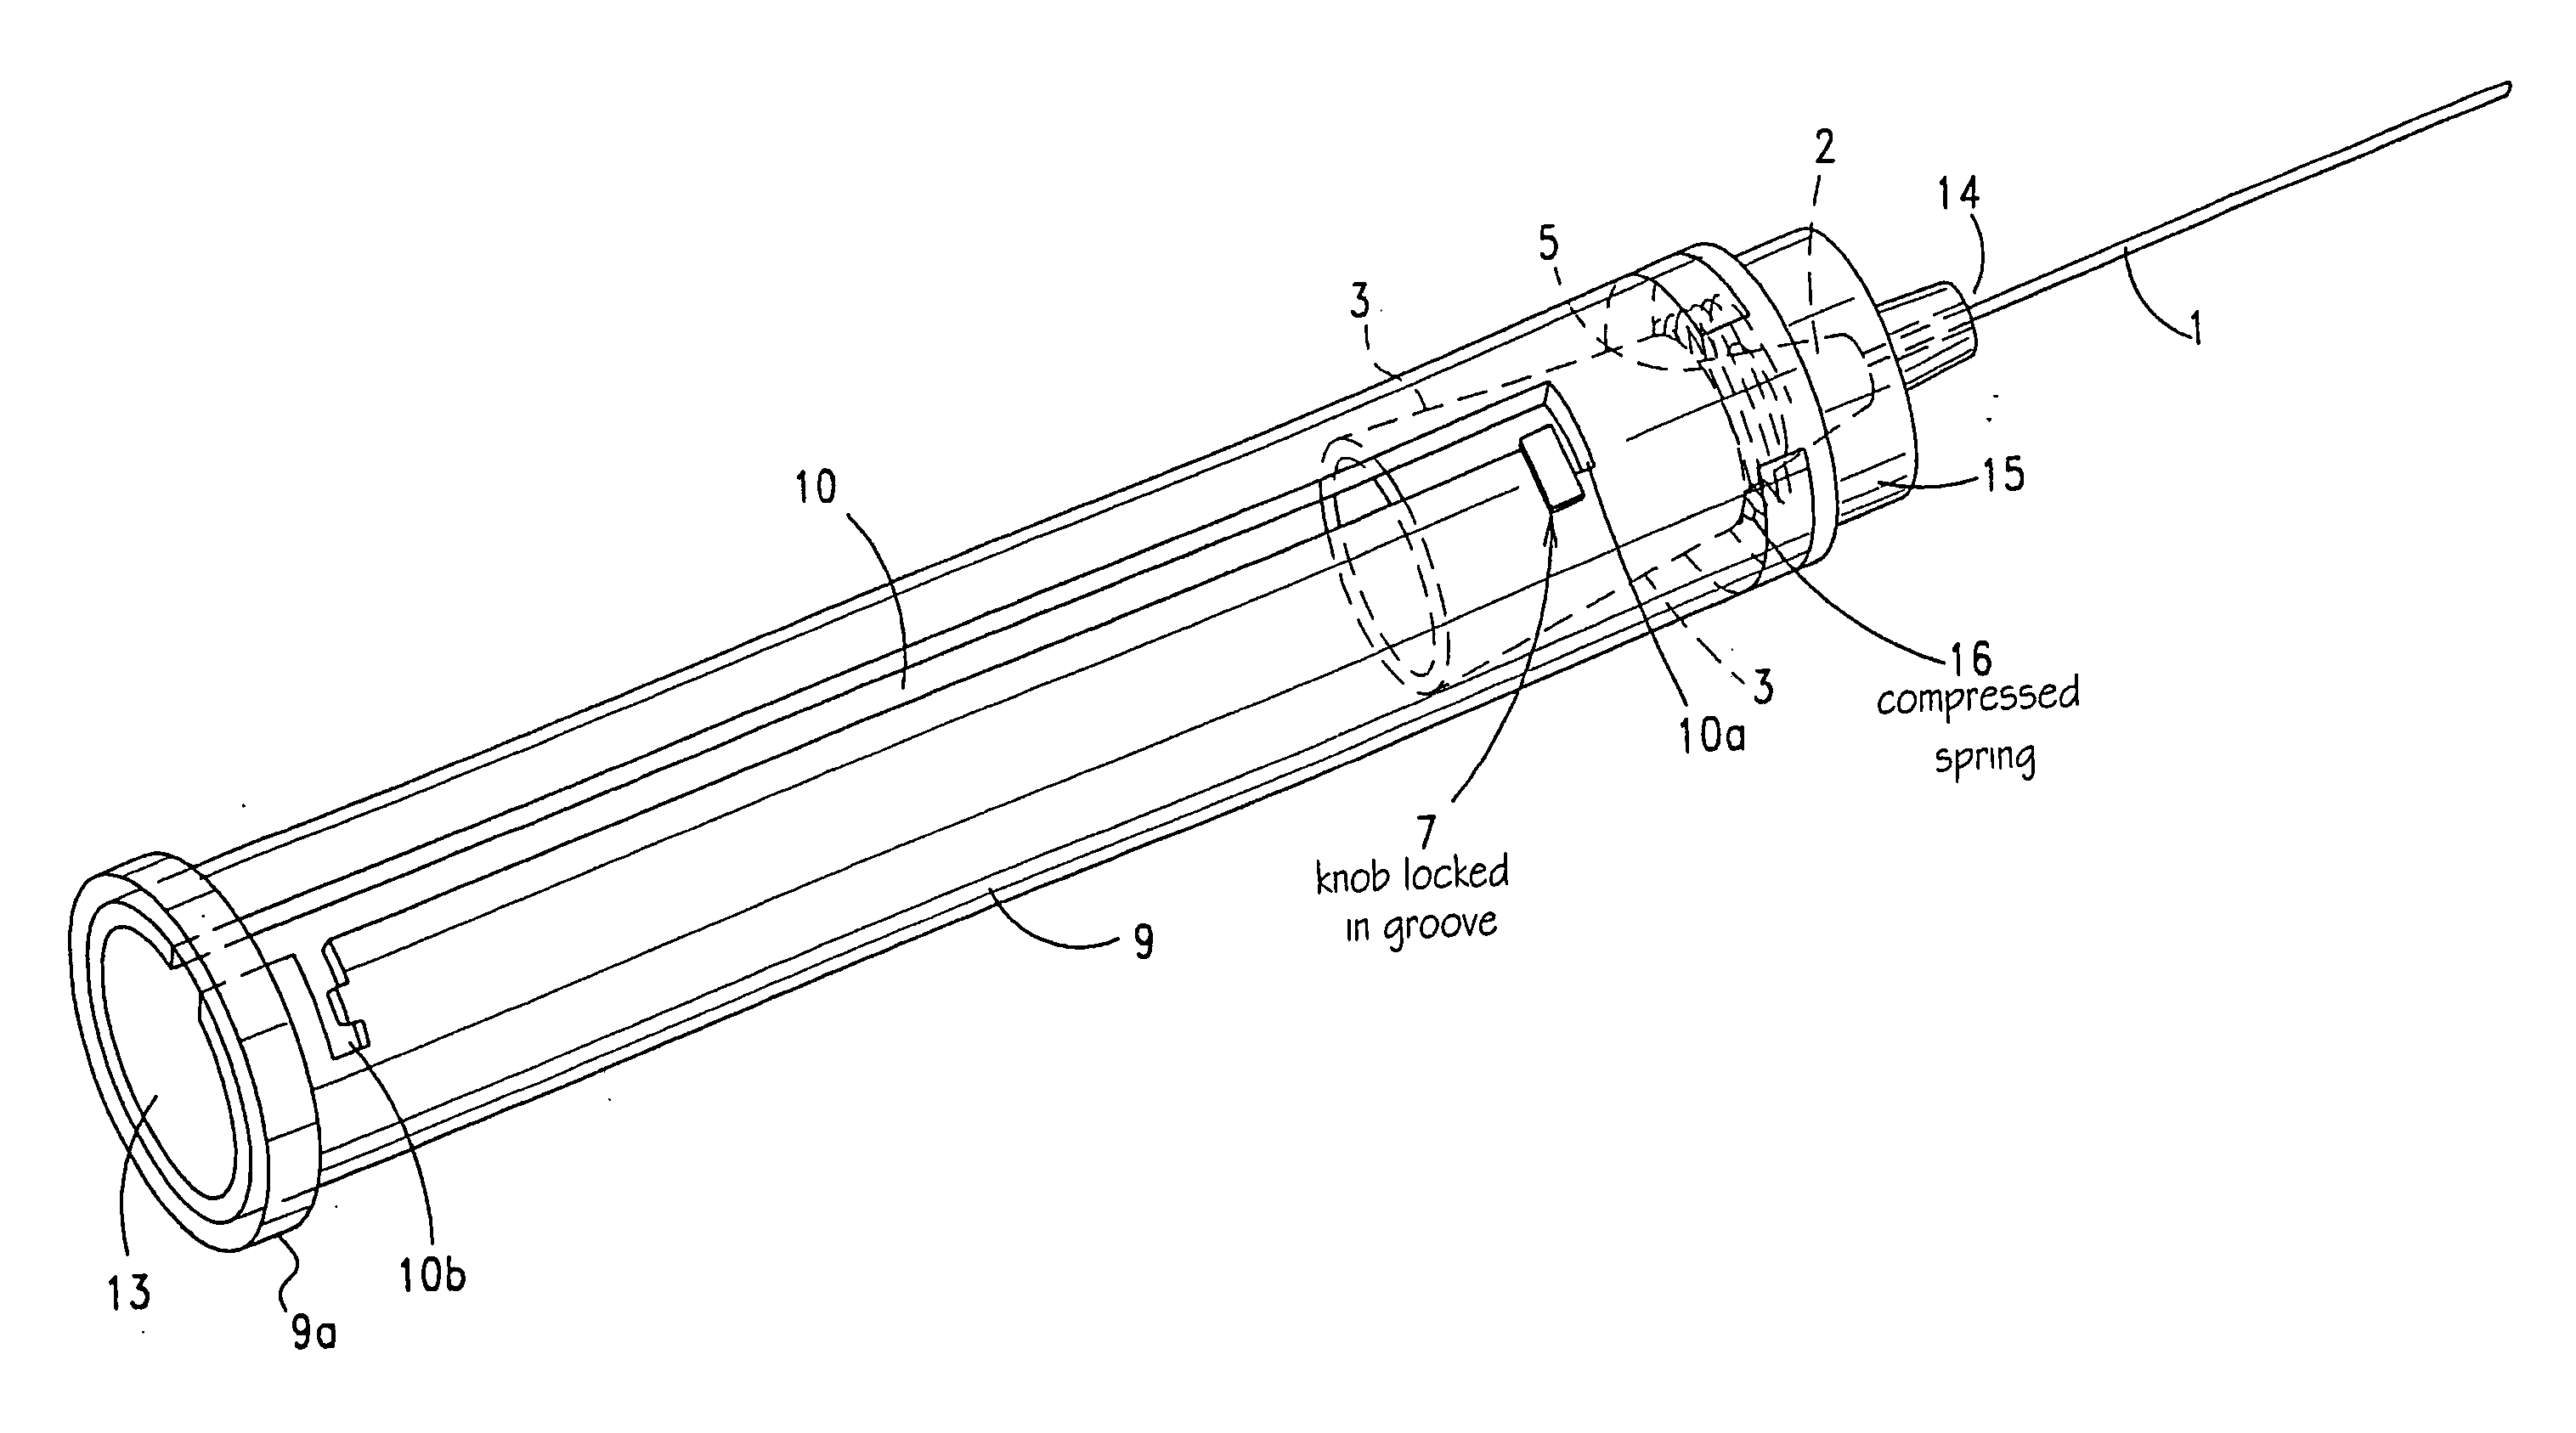 Hypodermic syringe needle assembly and method of making the same